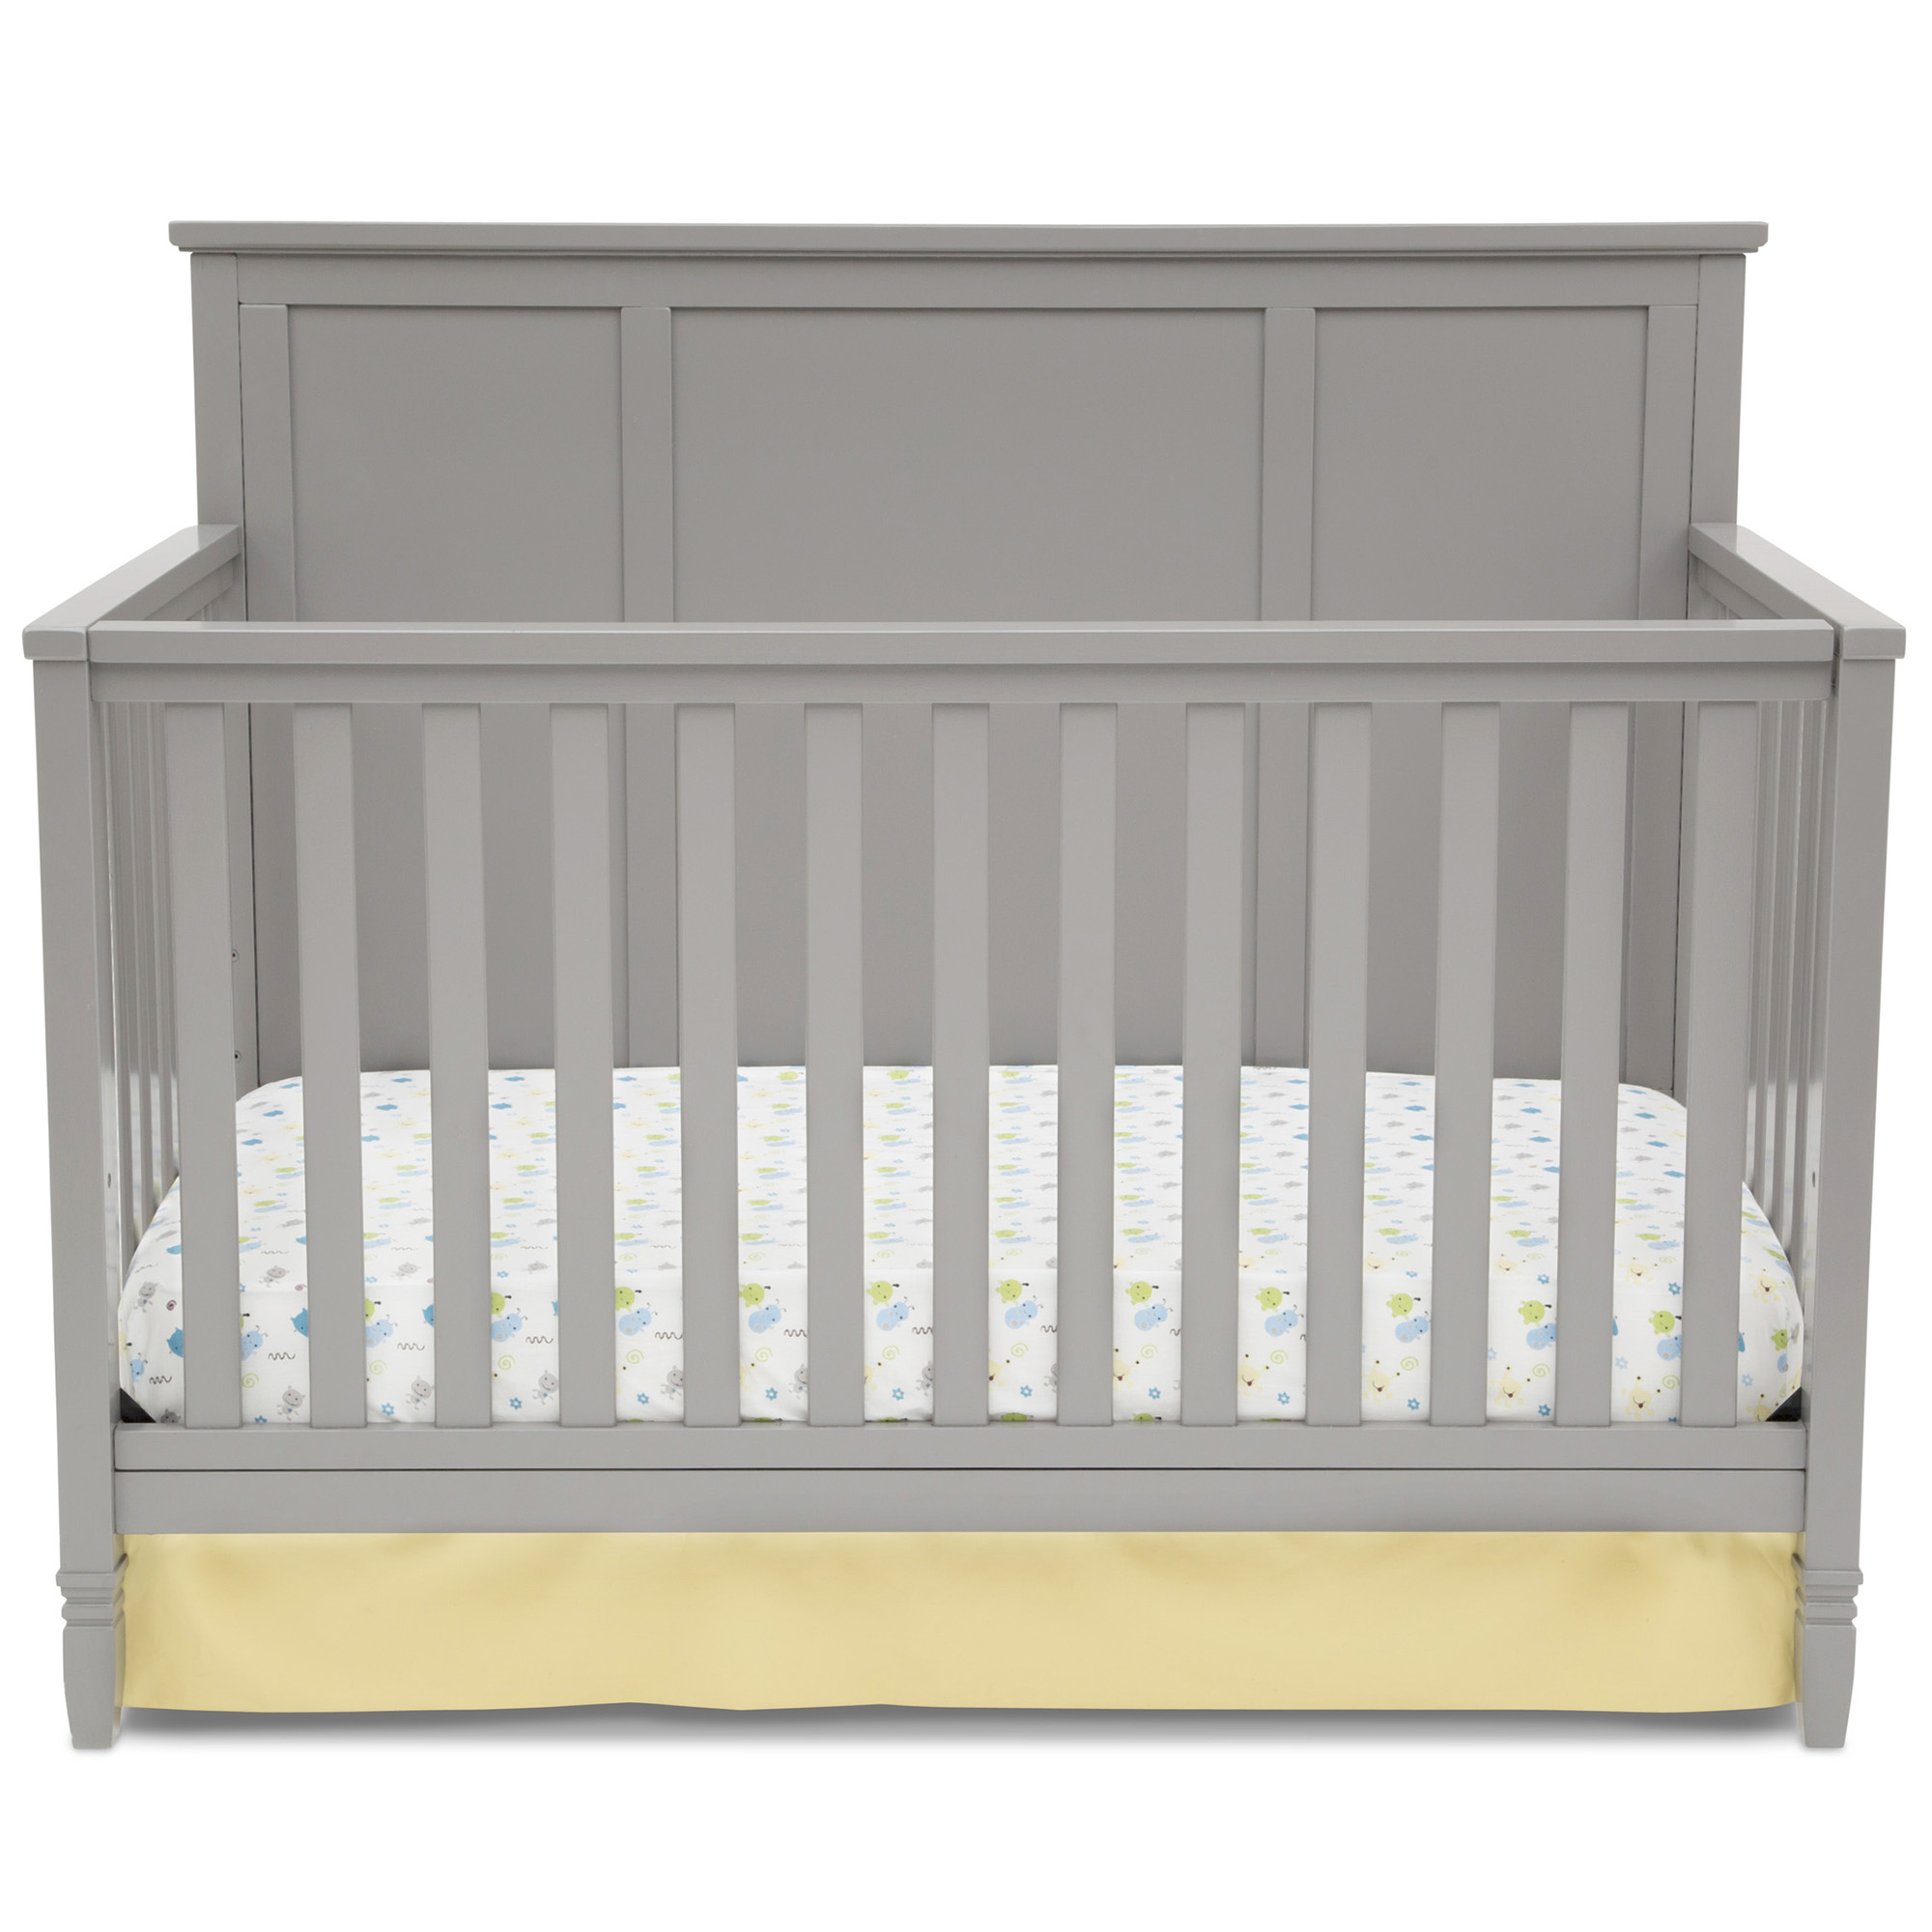 Delta Children Epic 4-in-1 Convertible Crib, Greenguard Gold Certified, Gray - image 5 of 8